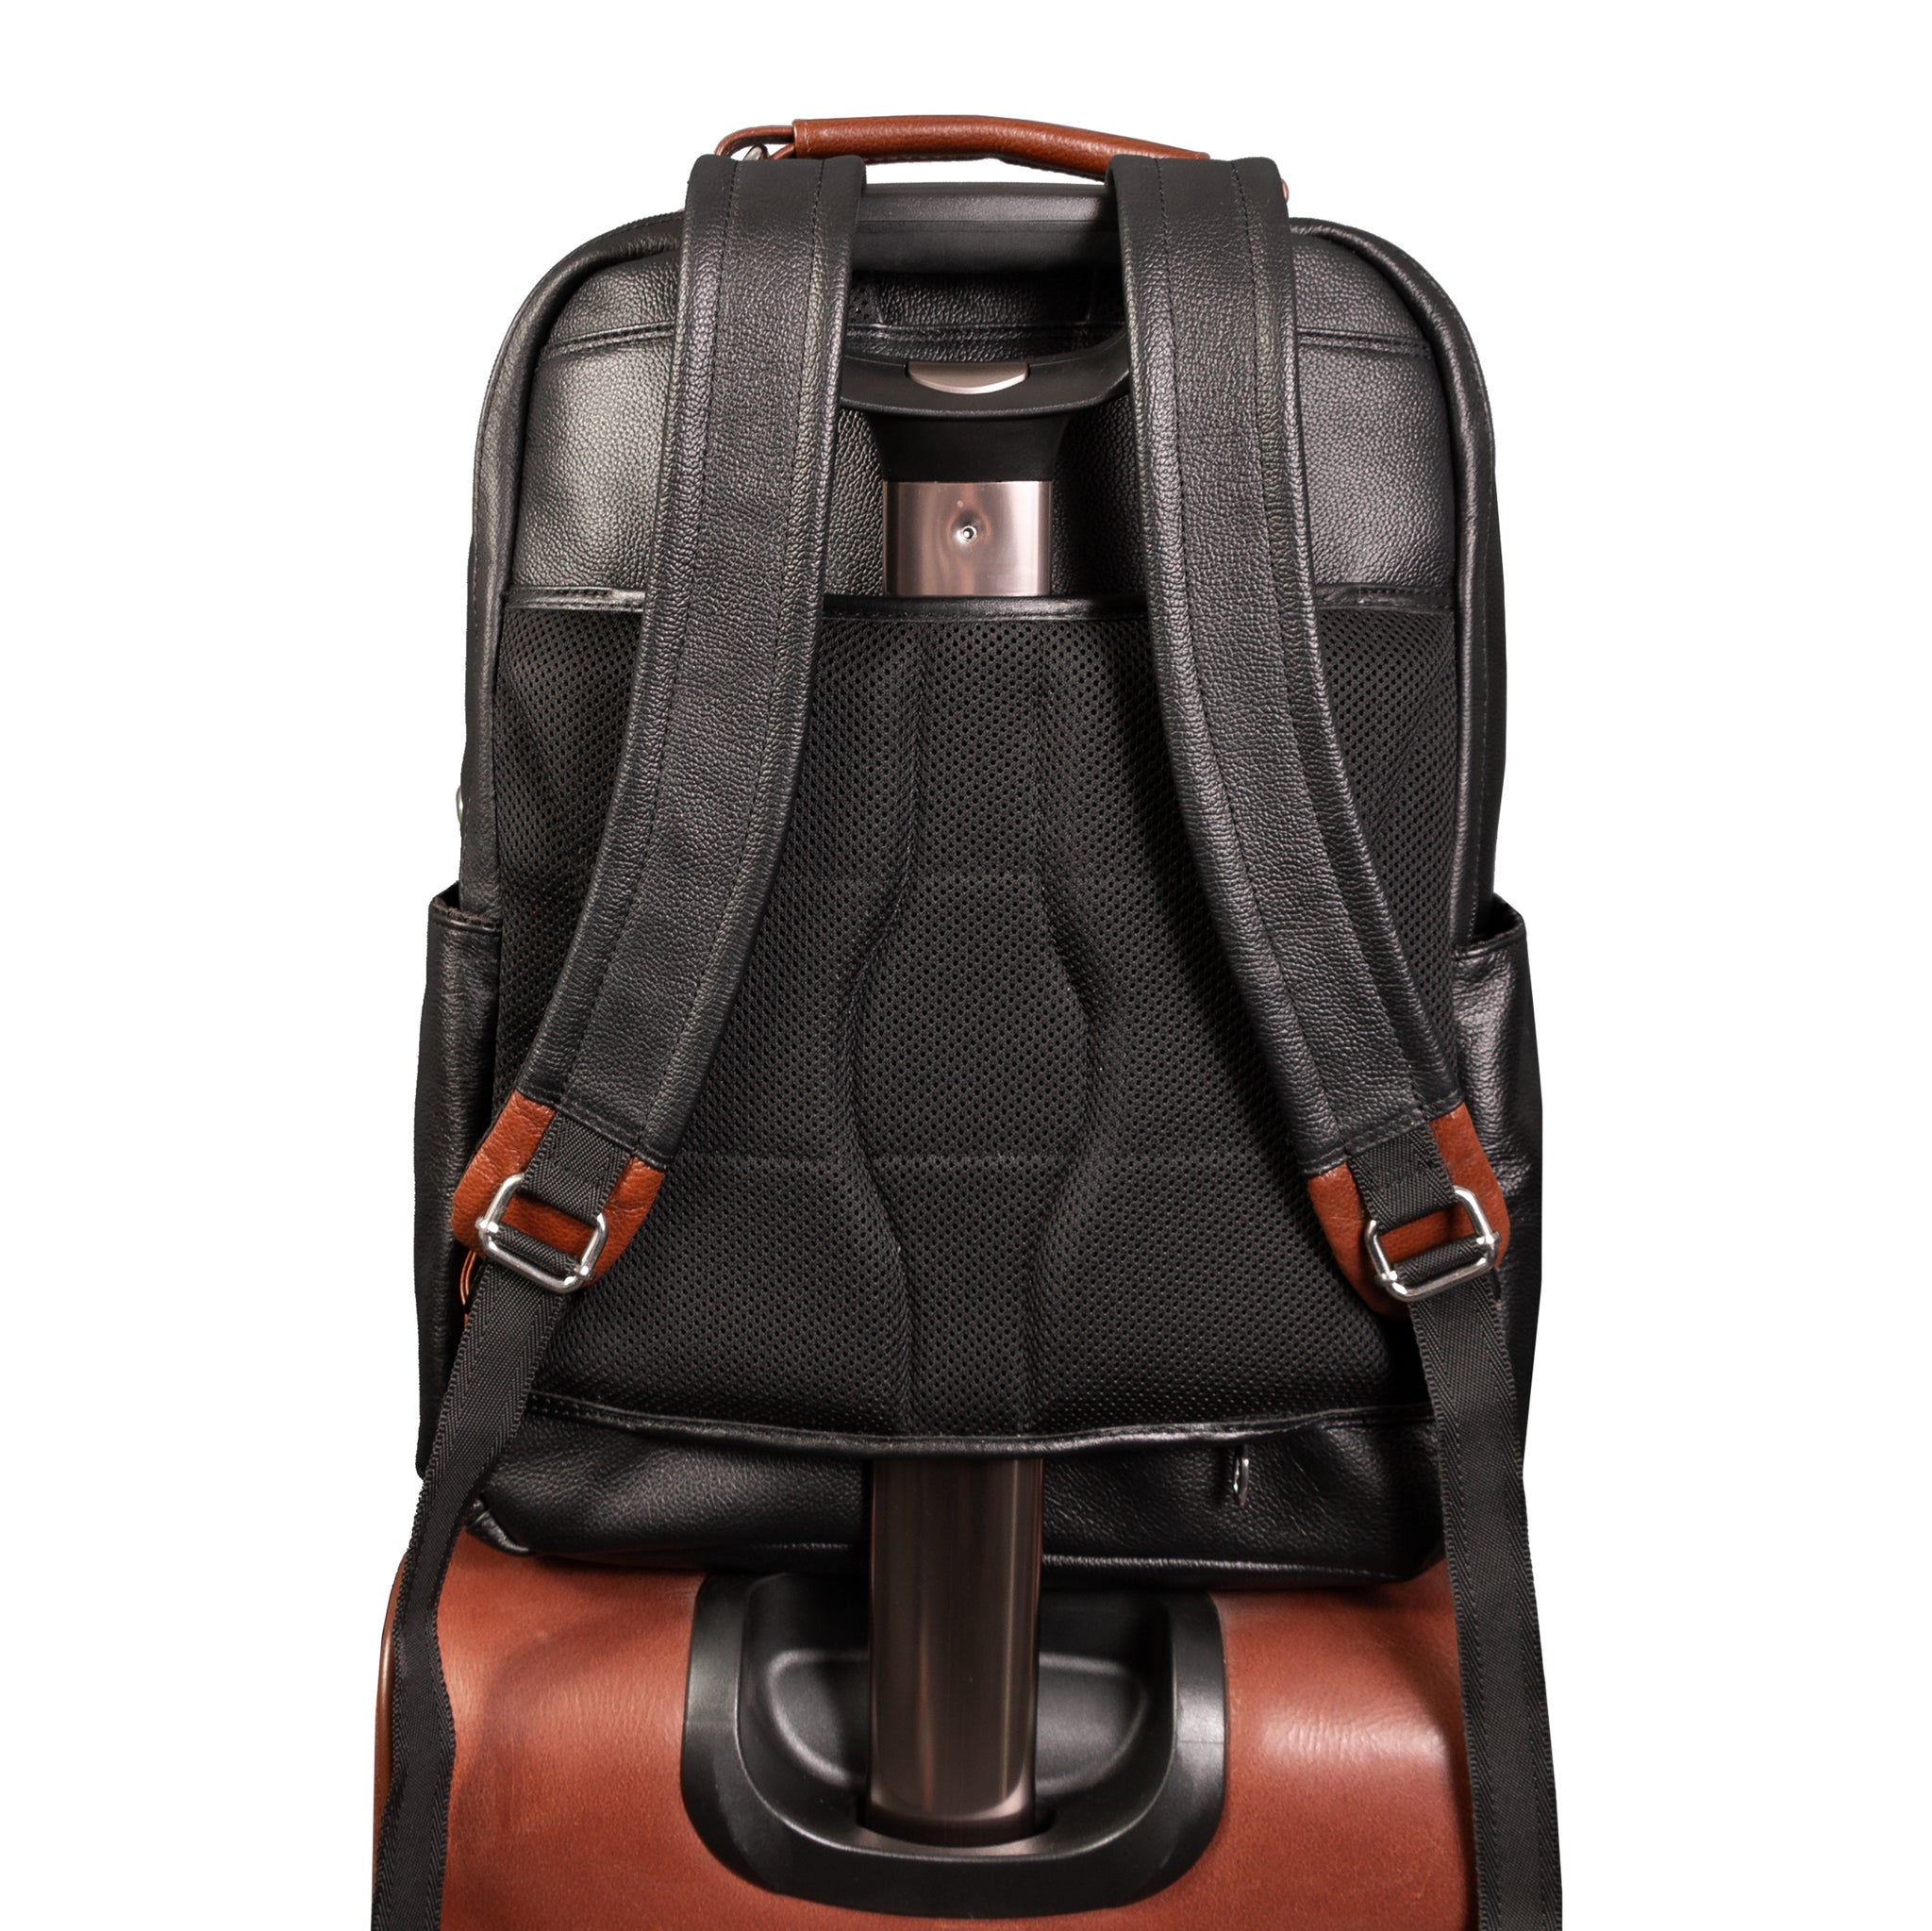 McKlein LOGAN 17" Leather, Two-Tone, Dual-Compartment, Laptop & Tablet Backpack